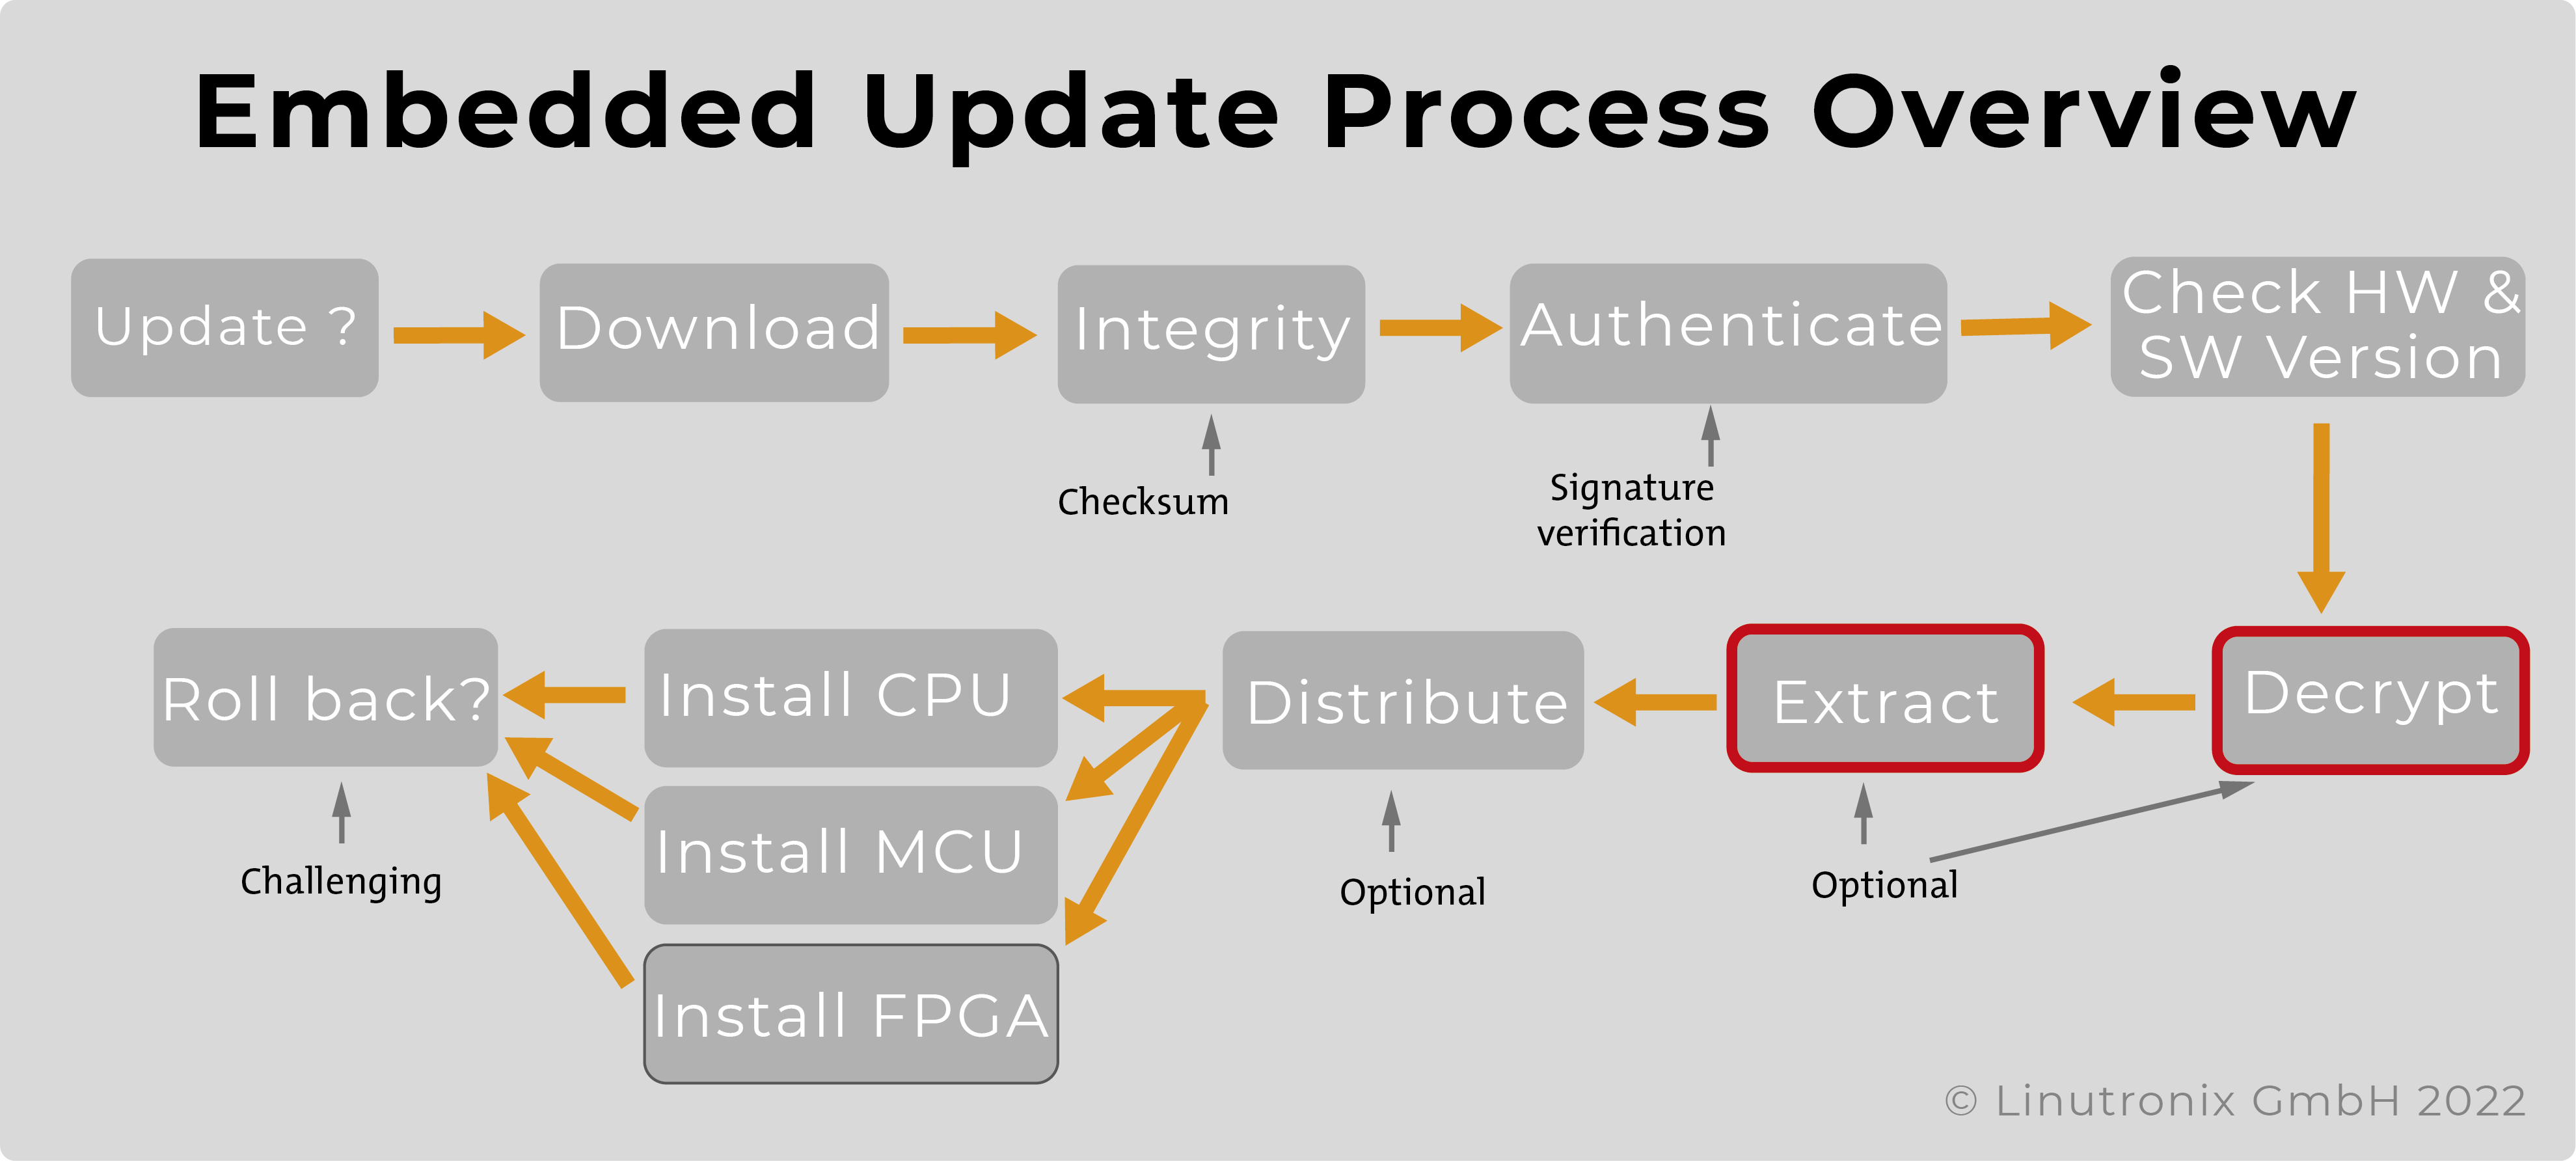 Embedded Update Process